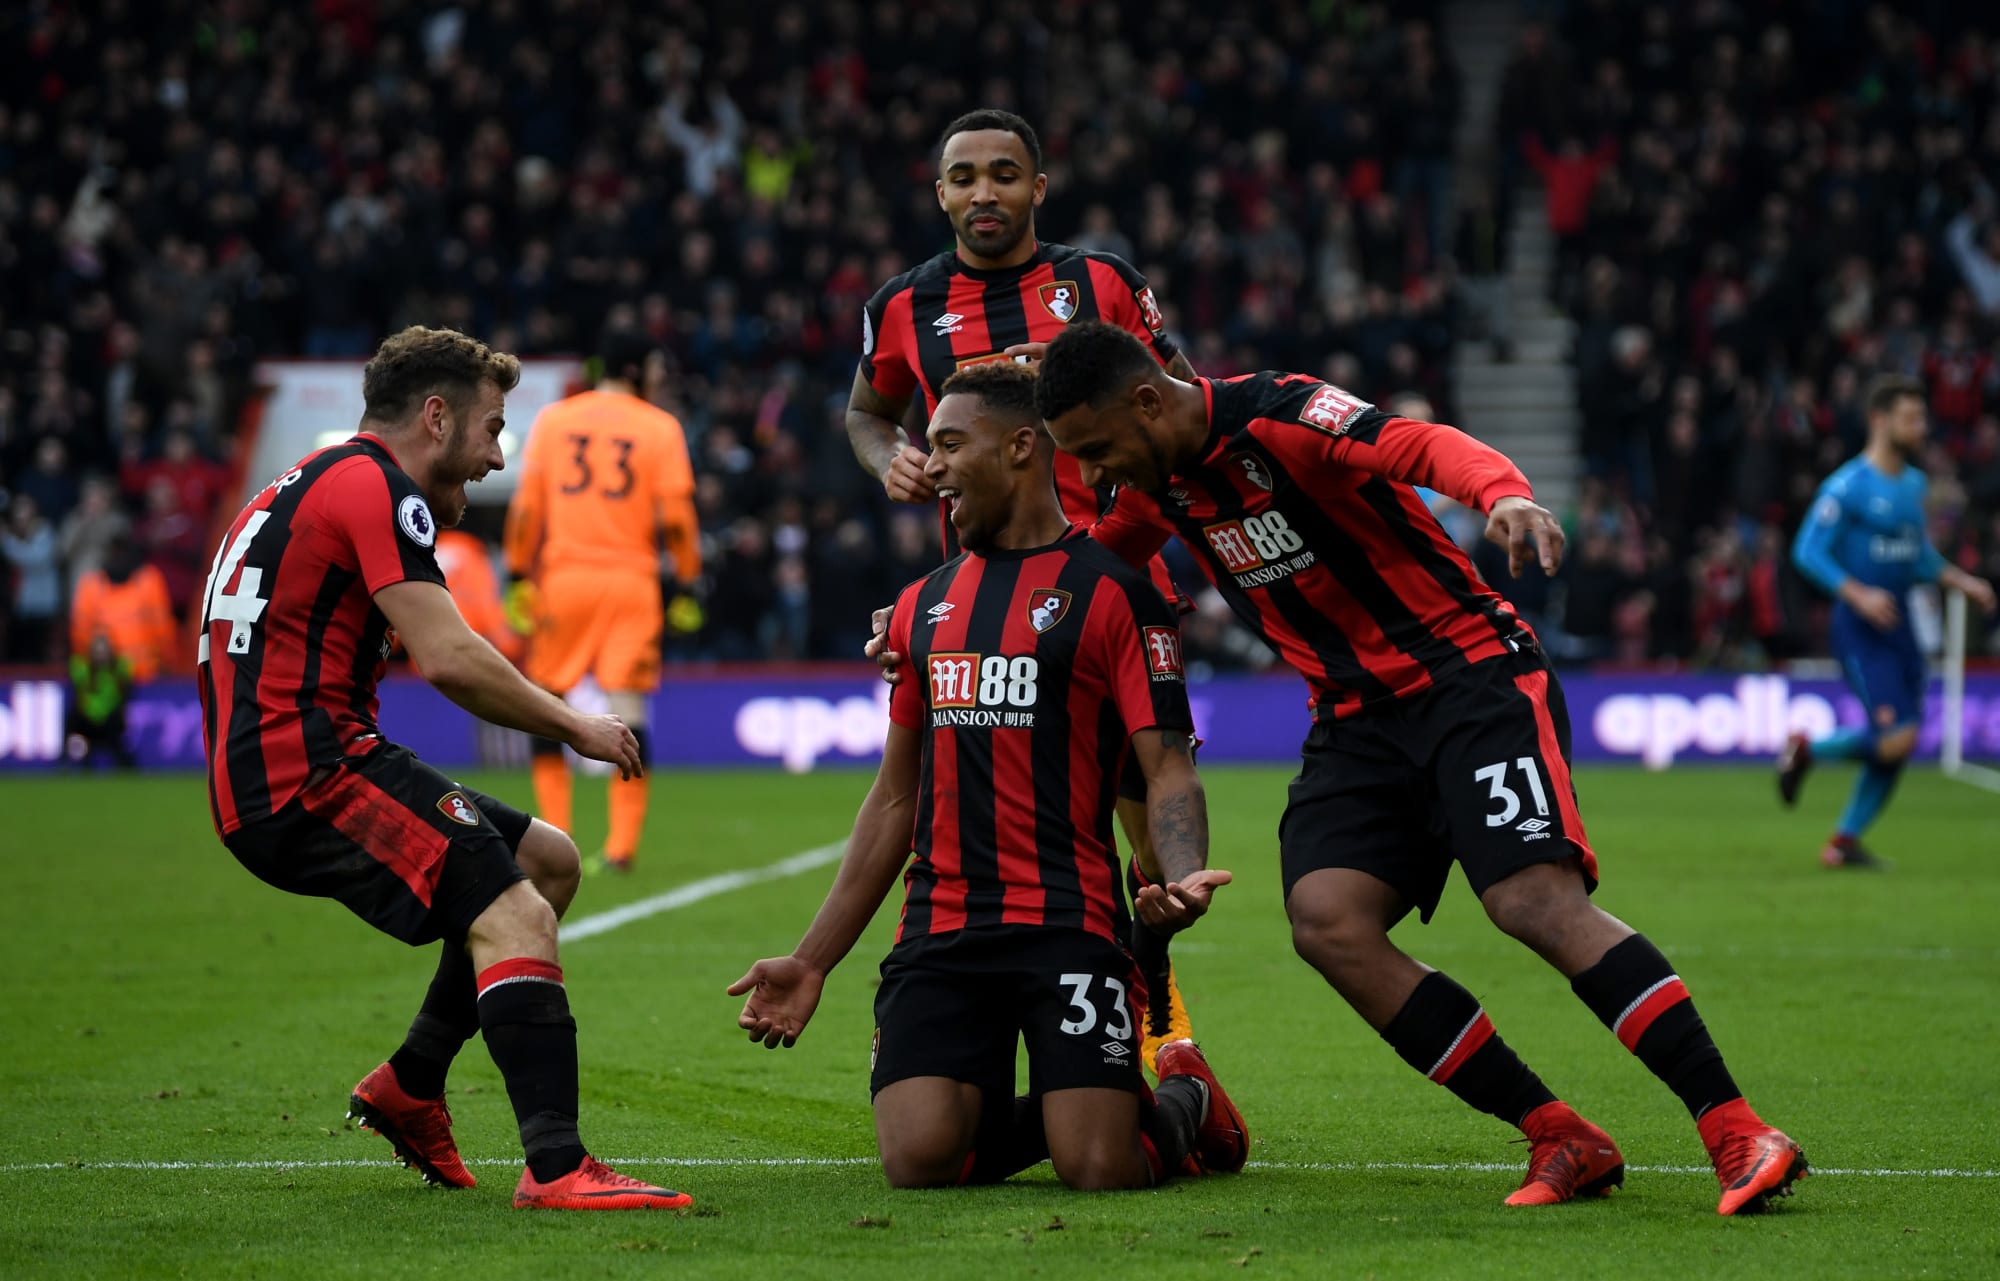 Arsenal Vs Bournemouth Highlights and analysis You're joking